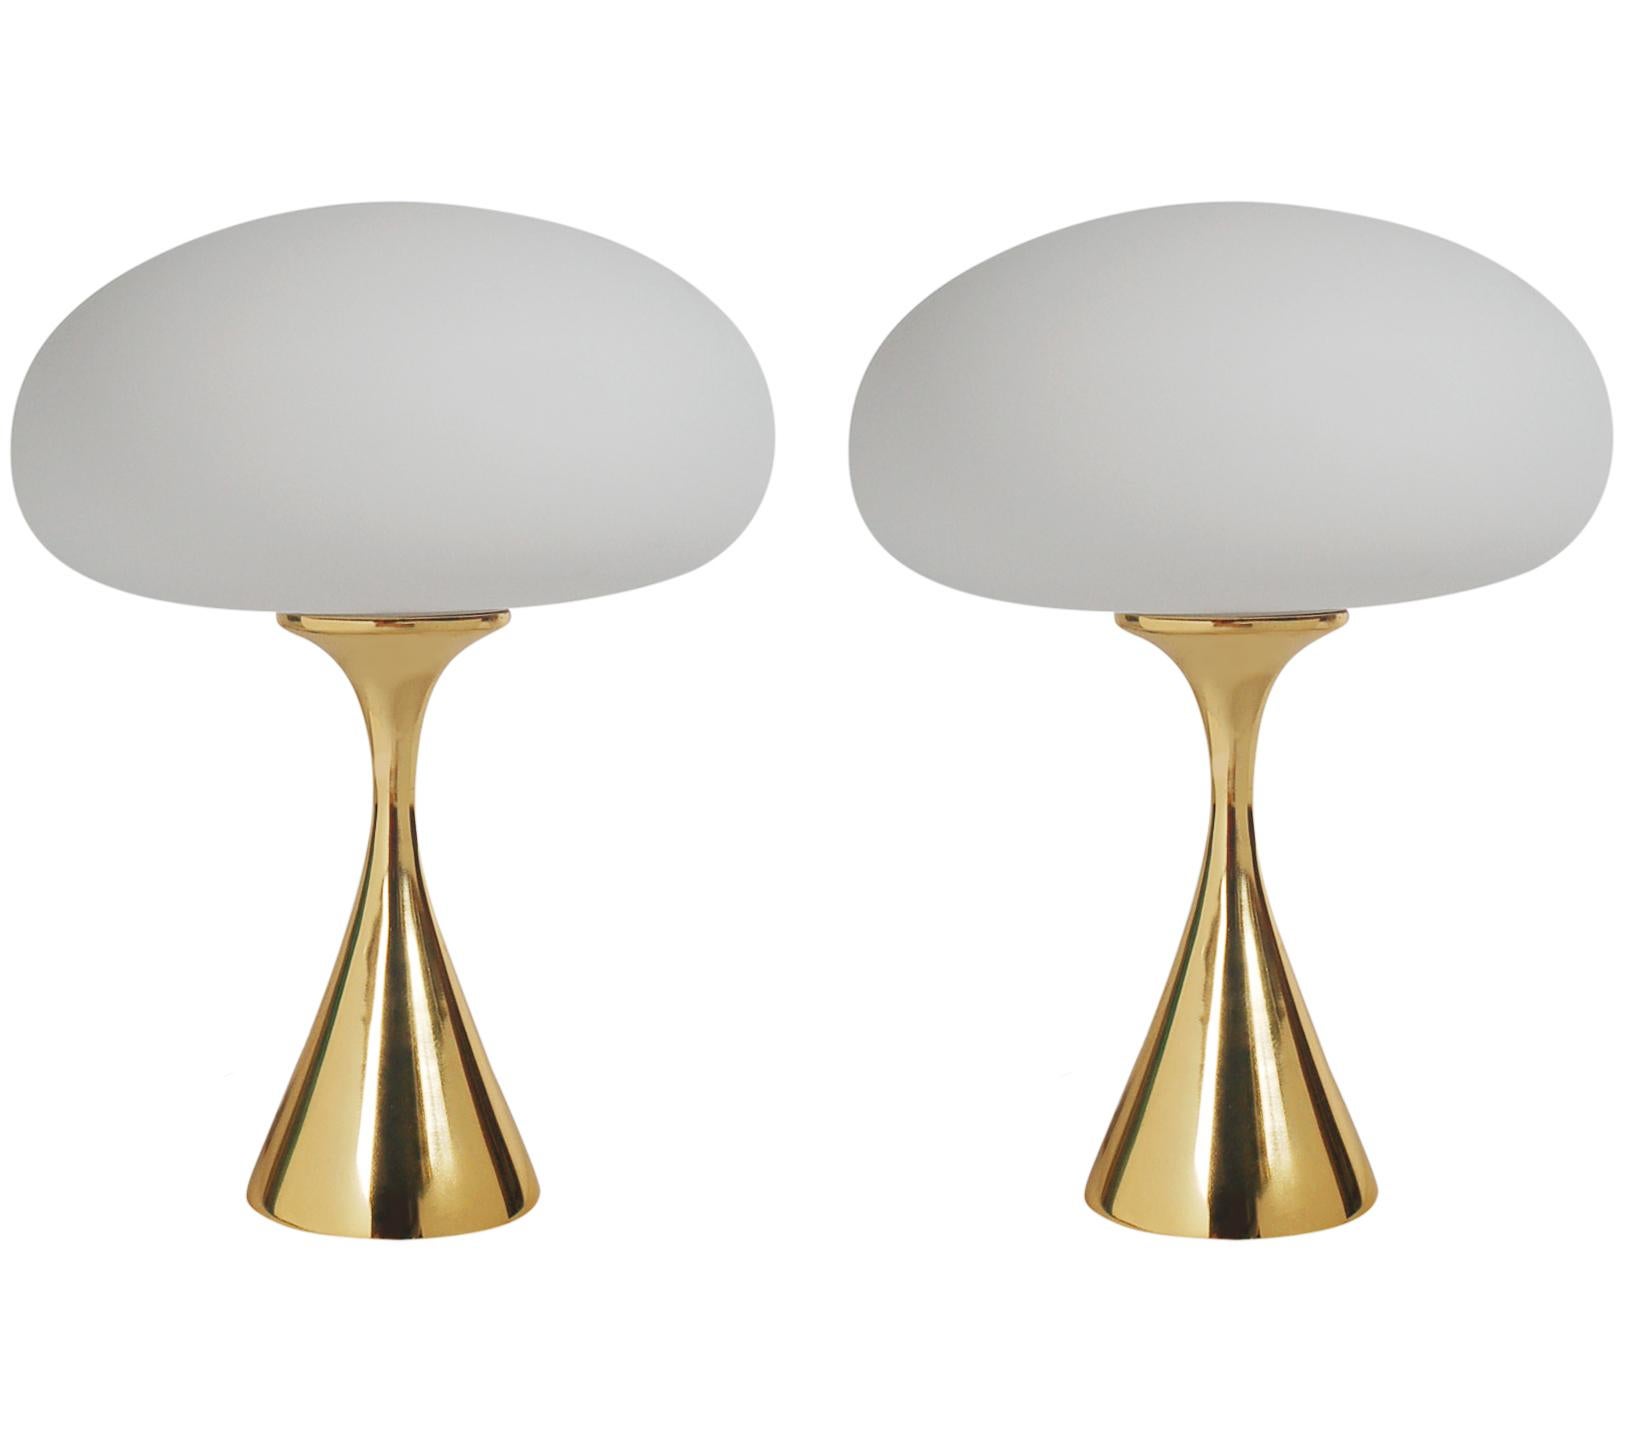 Aluminum Pair of Mid-Century Modern Laurel Mushroom Table Lamps in Brass by Bill Curry